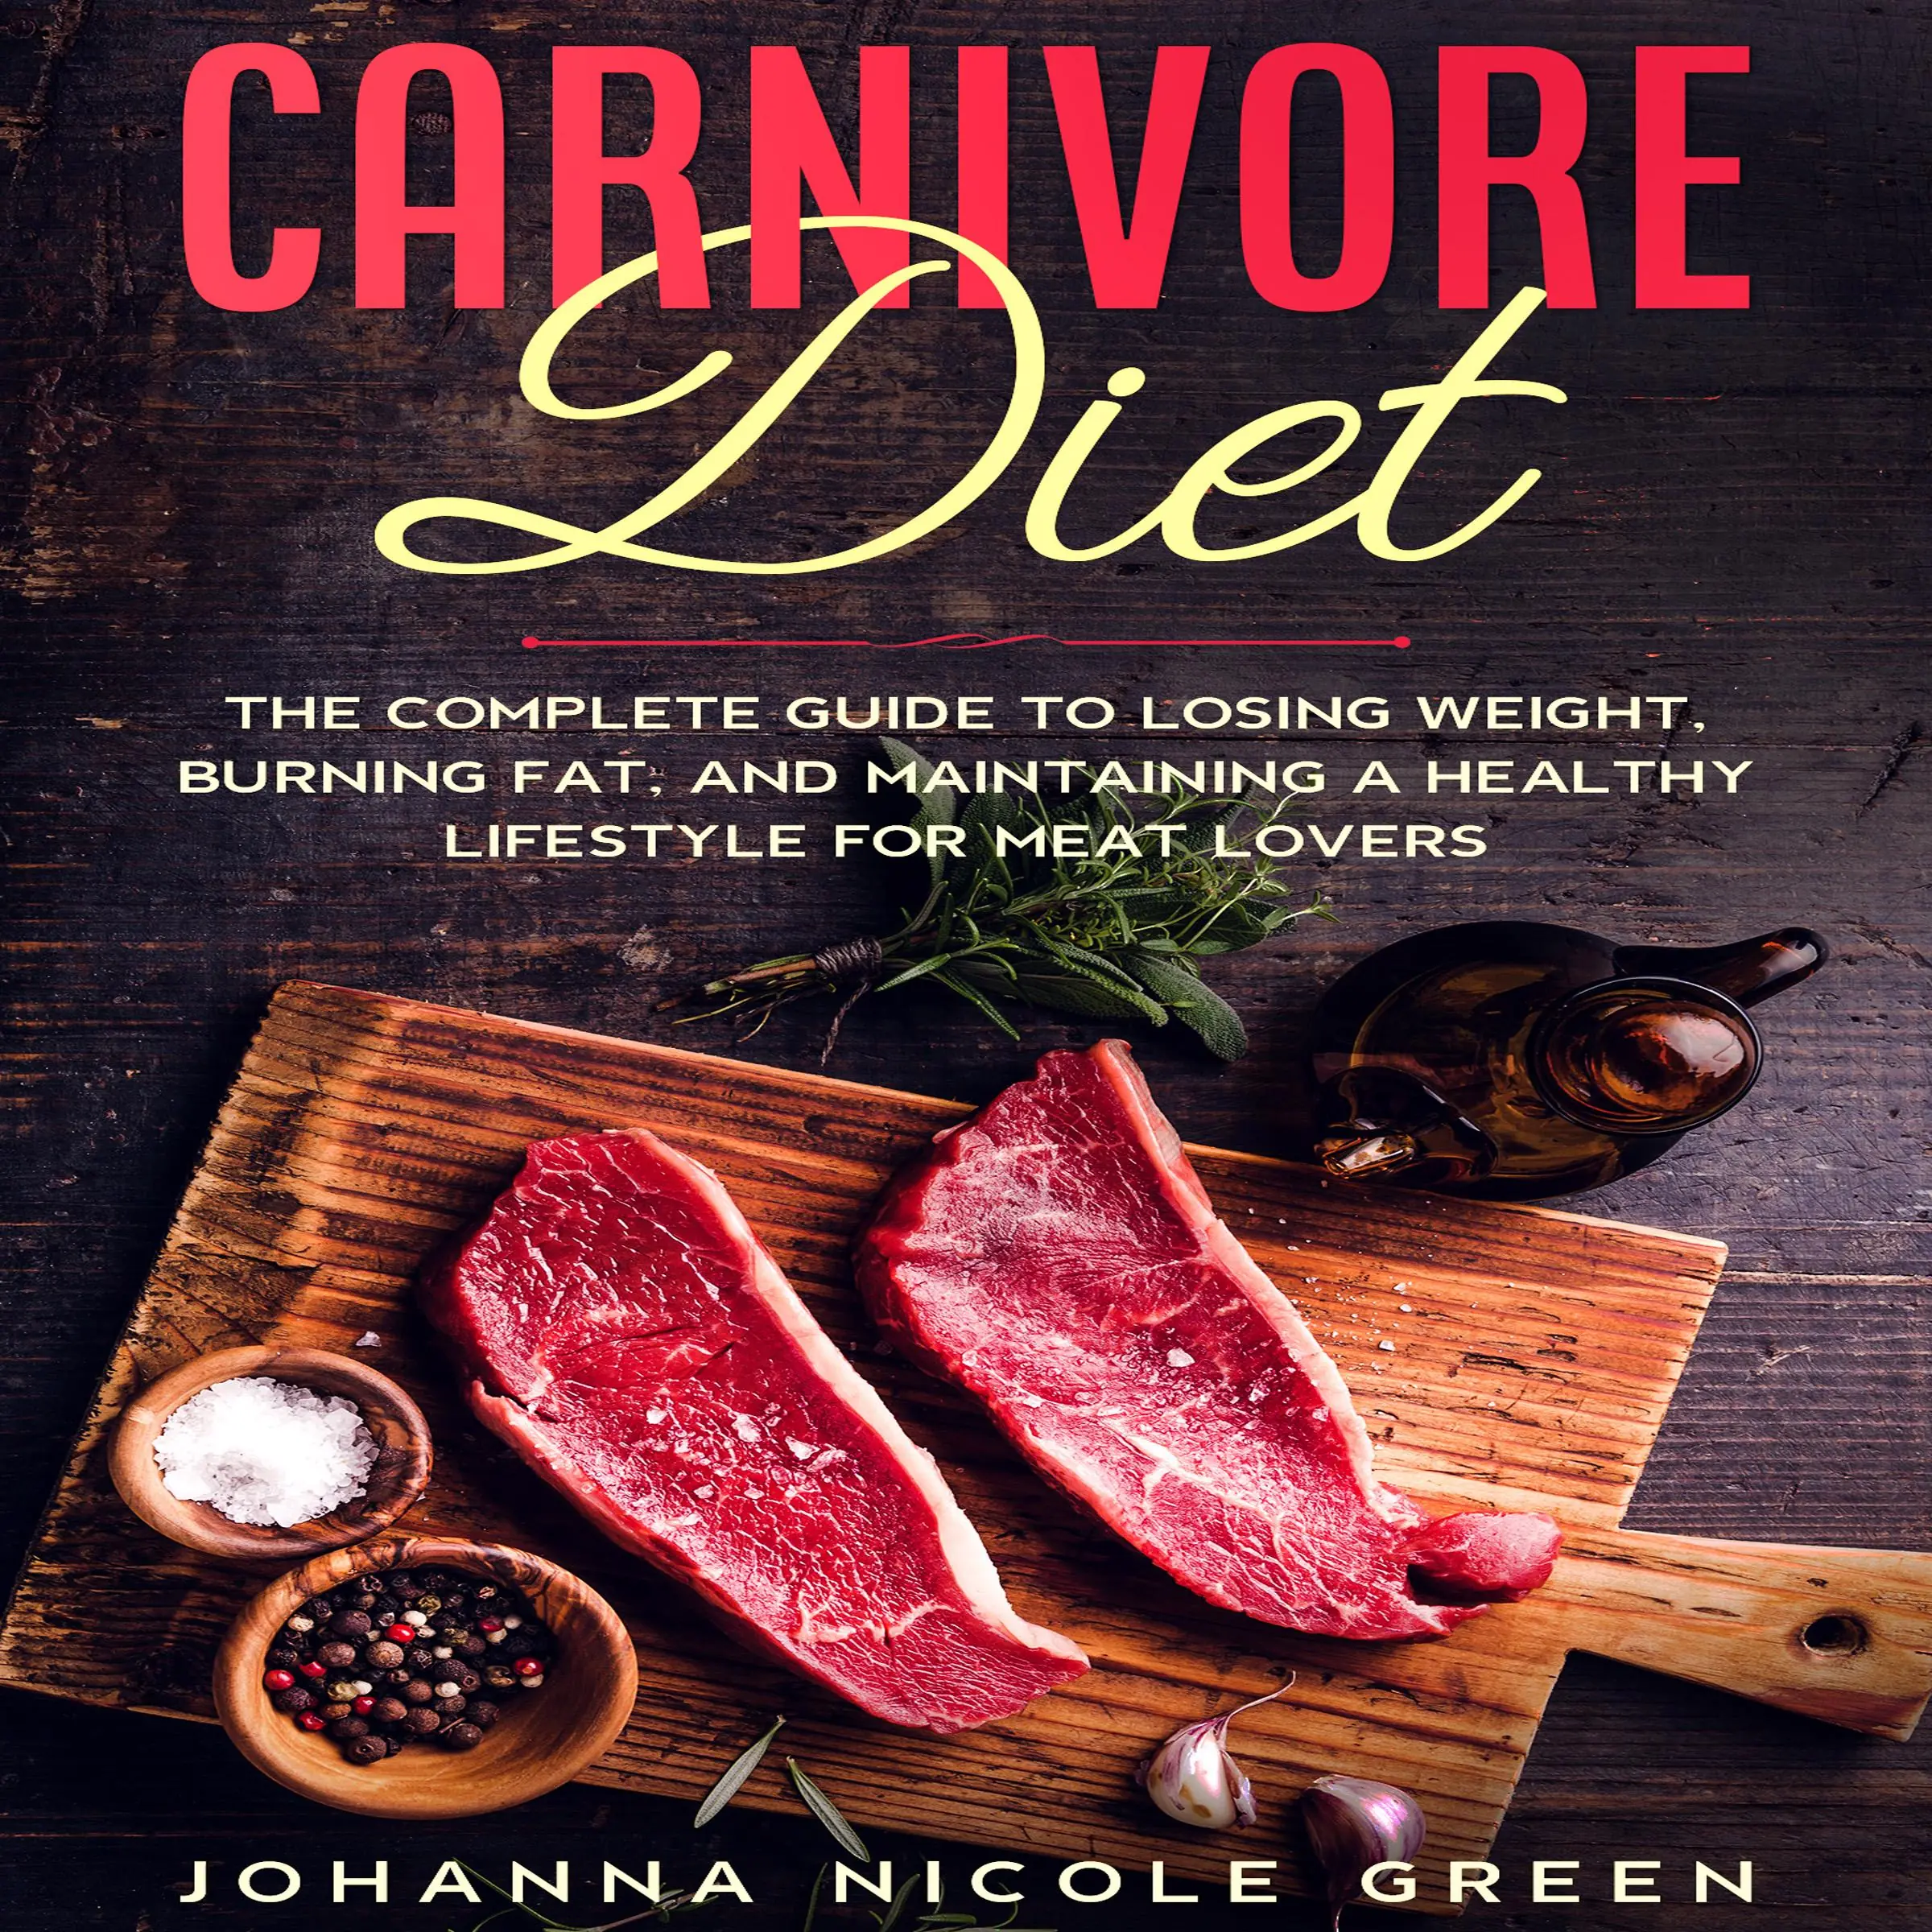 Carnivore Diet: The Complete Guide to Losing Weight, Burning Fat, and Maintaining a Healthy Lifestyle for Meat Lovers Audiobook by Johanna Nicole Green